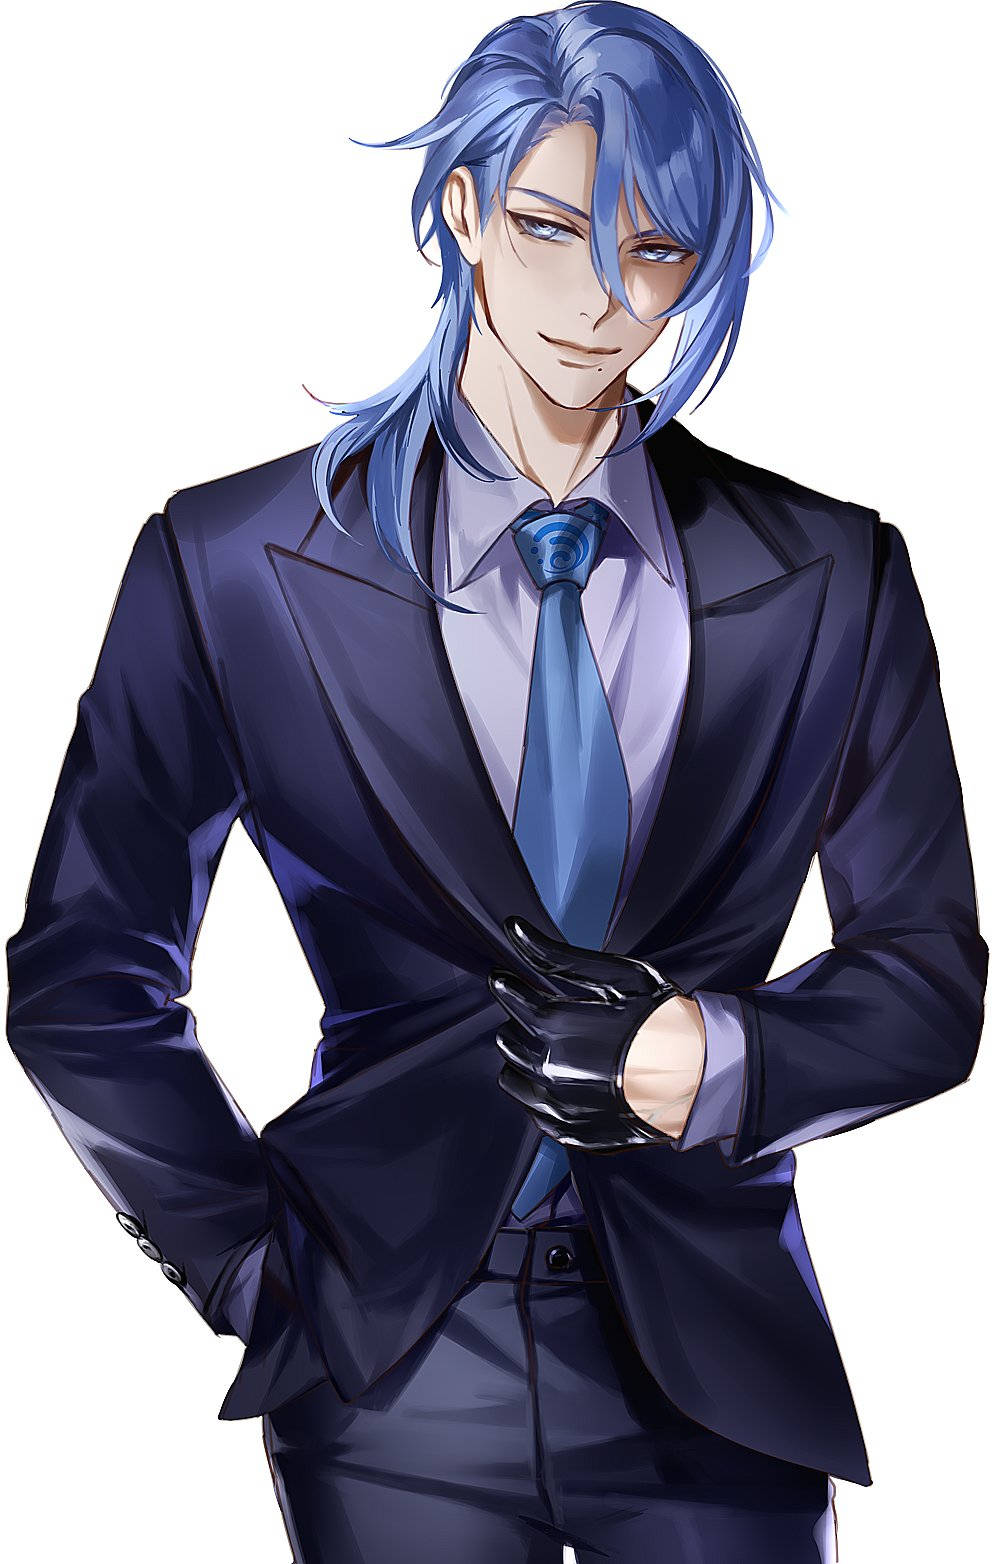 Kamisato Ayato In A Suit Background